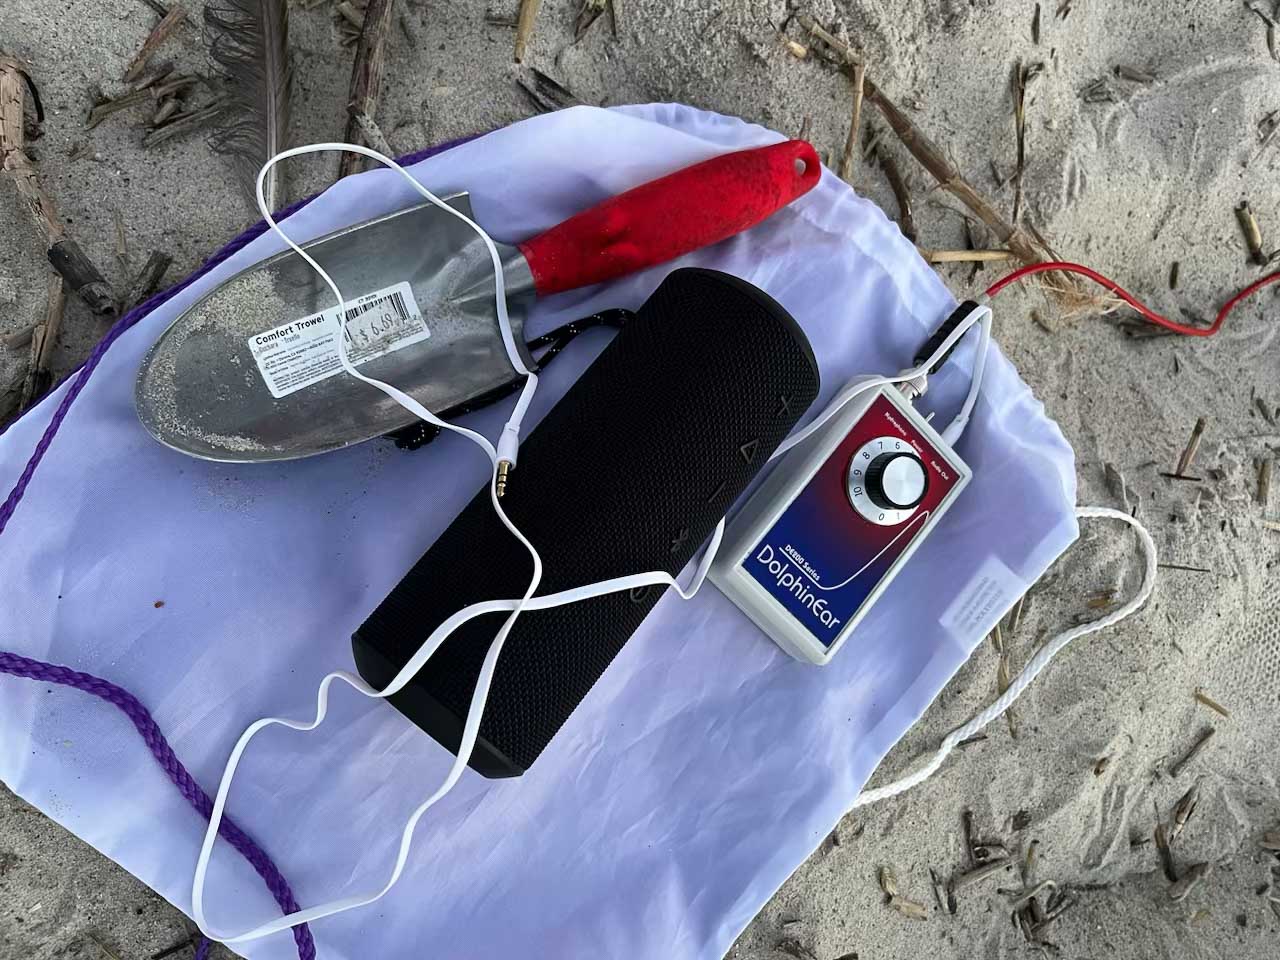 A DolphinEar hydrophone with a bluetooth speaker and a hand trowel sitting on a backpack on the sand.